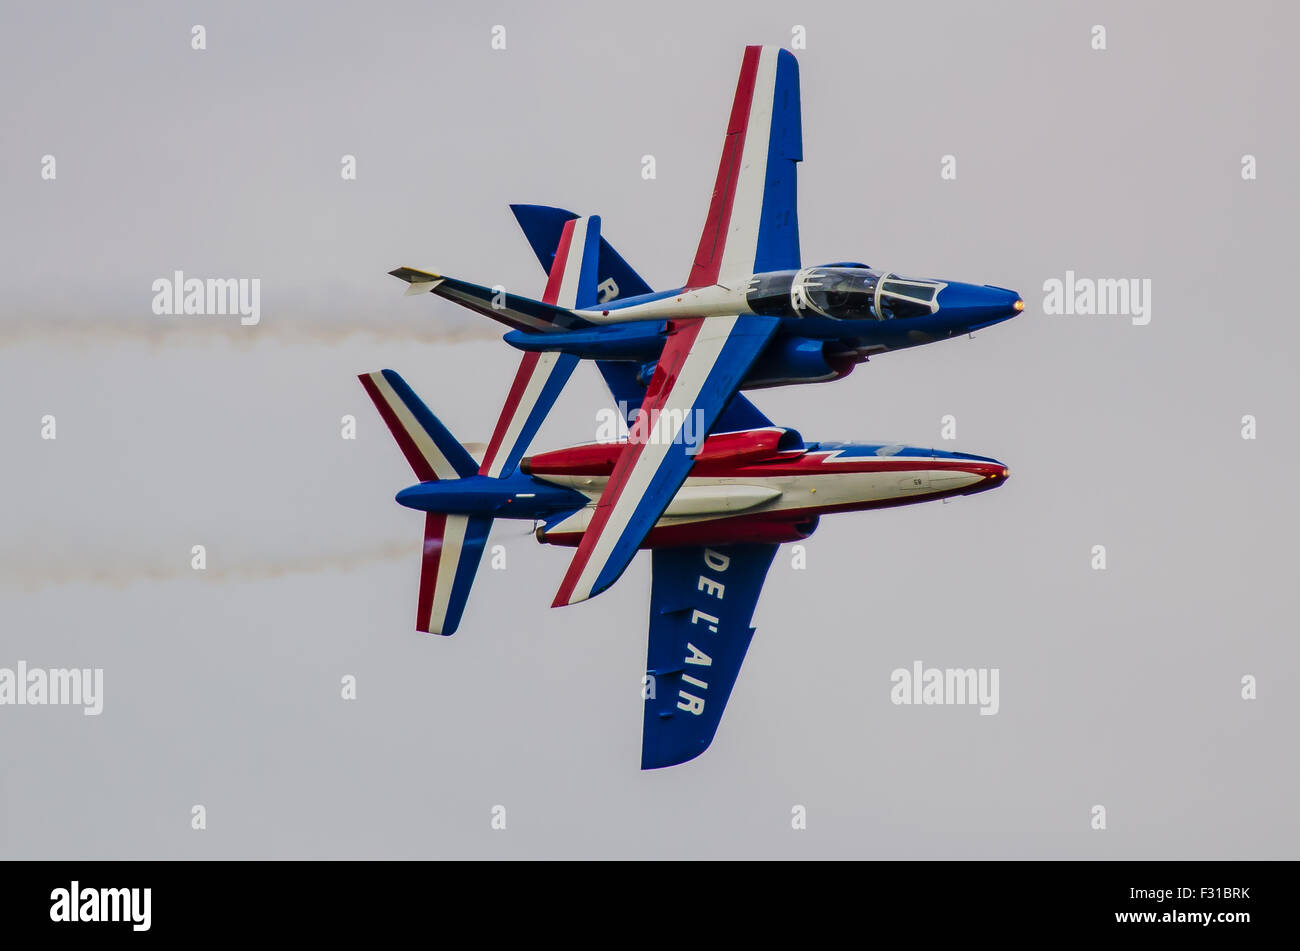 Patrouille Acrobatique de France (French Acrobatic Patrol) also known as the Patrouille de France or PAF, is French air display team. Alpha Jet plane Stock Photo